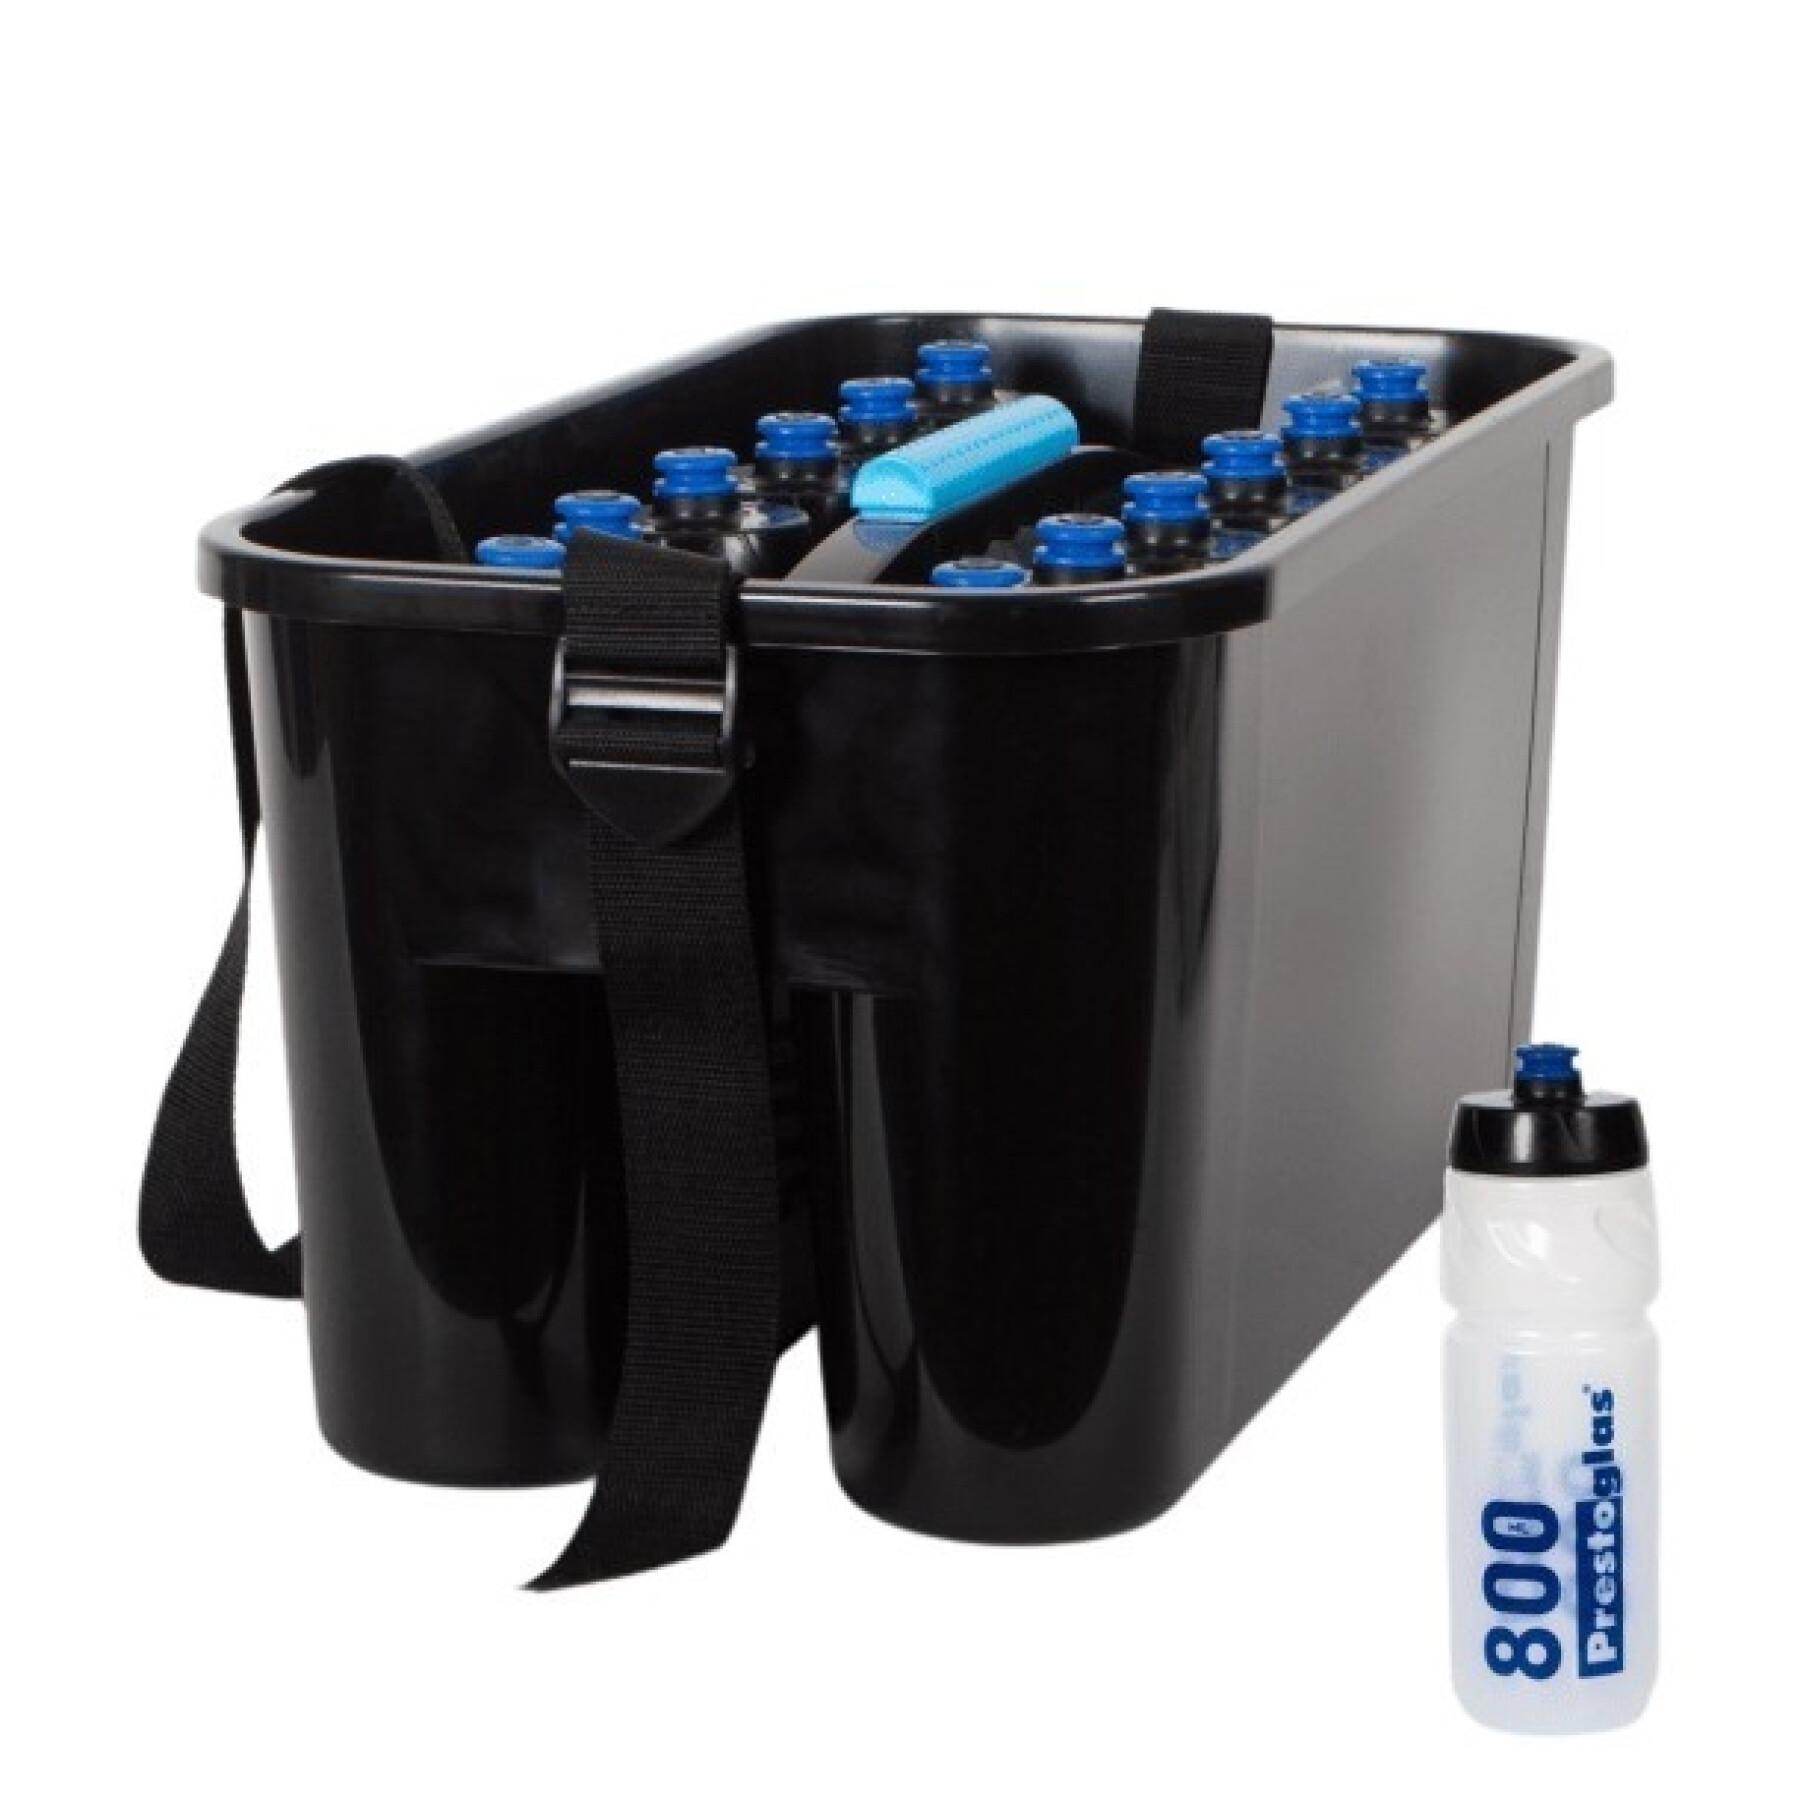 Water Bottle Holders, Pack Accessories